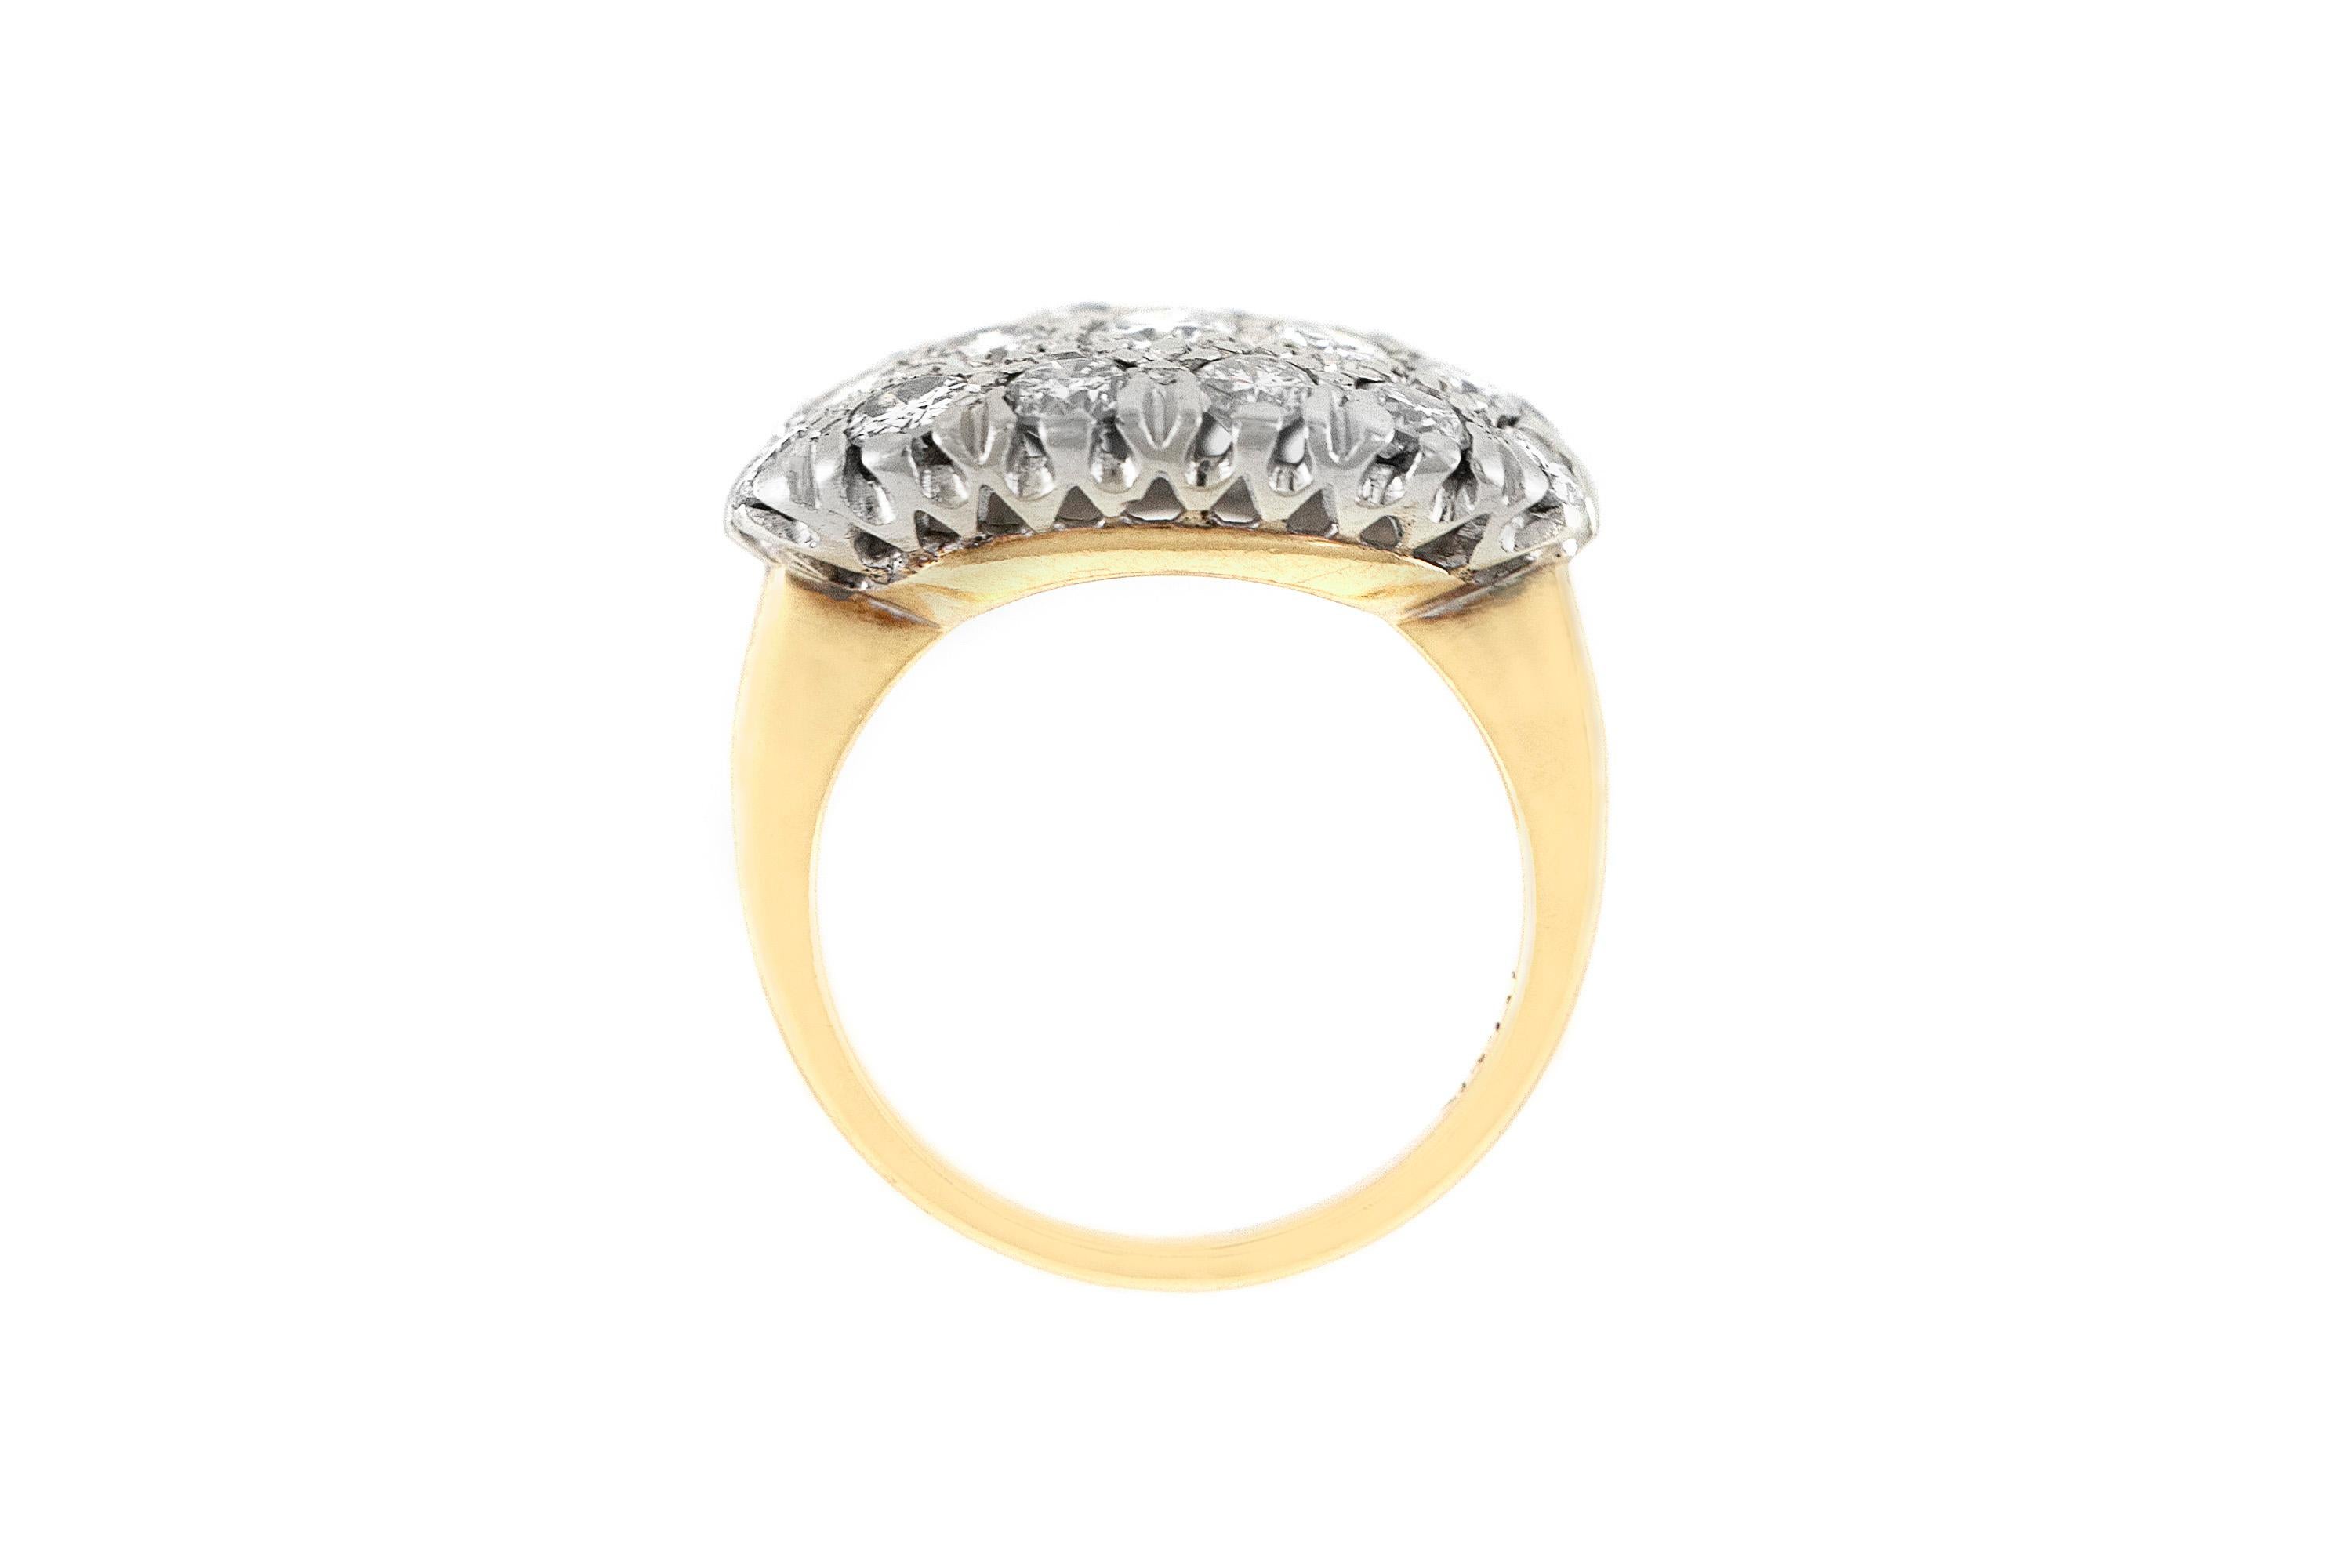 The ring is finely crafted in 14k yellow gold with diamonds weighing approximately tota of 1.10 carat.